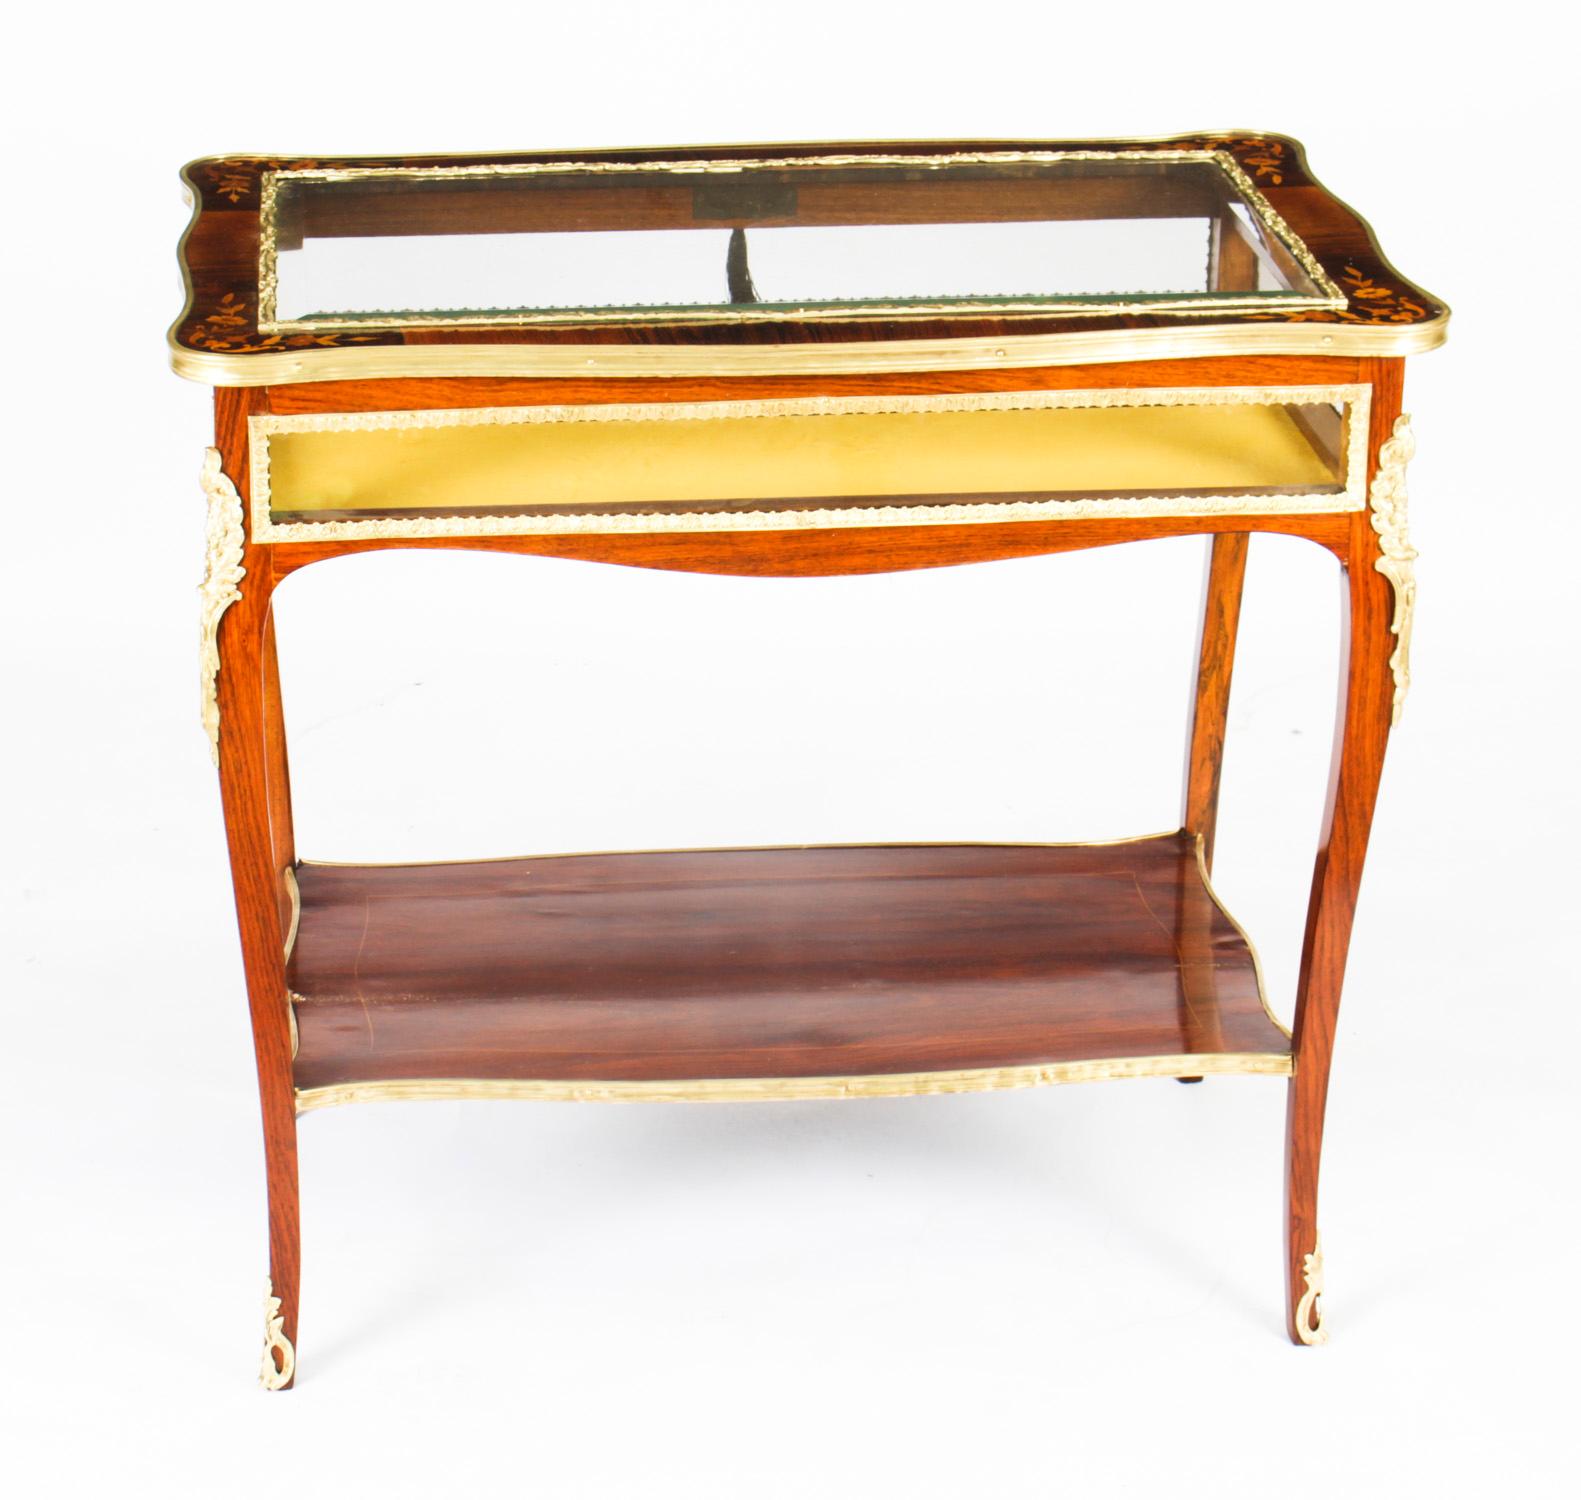 This is a truly beautiful antique French marquetry and ormolu mounted Louis Revival bijouterie display table circa 1860 in date.
 
The display table features a hinged and bevelled glass top with serpentine ormolu edging, inlaid with floral